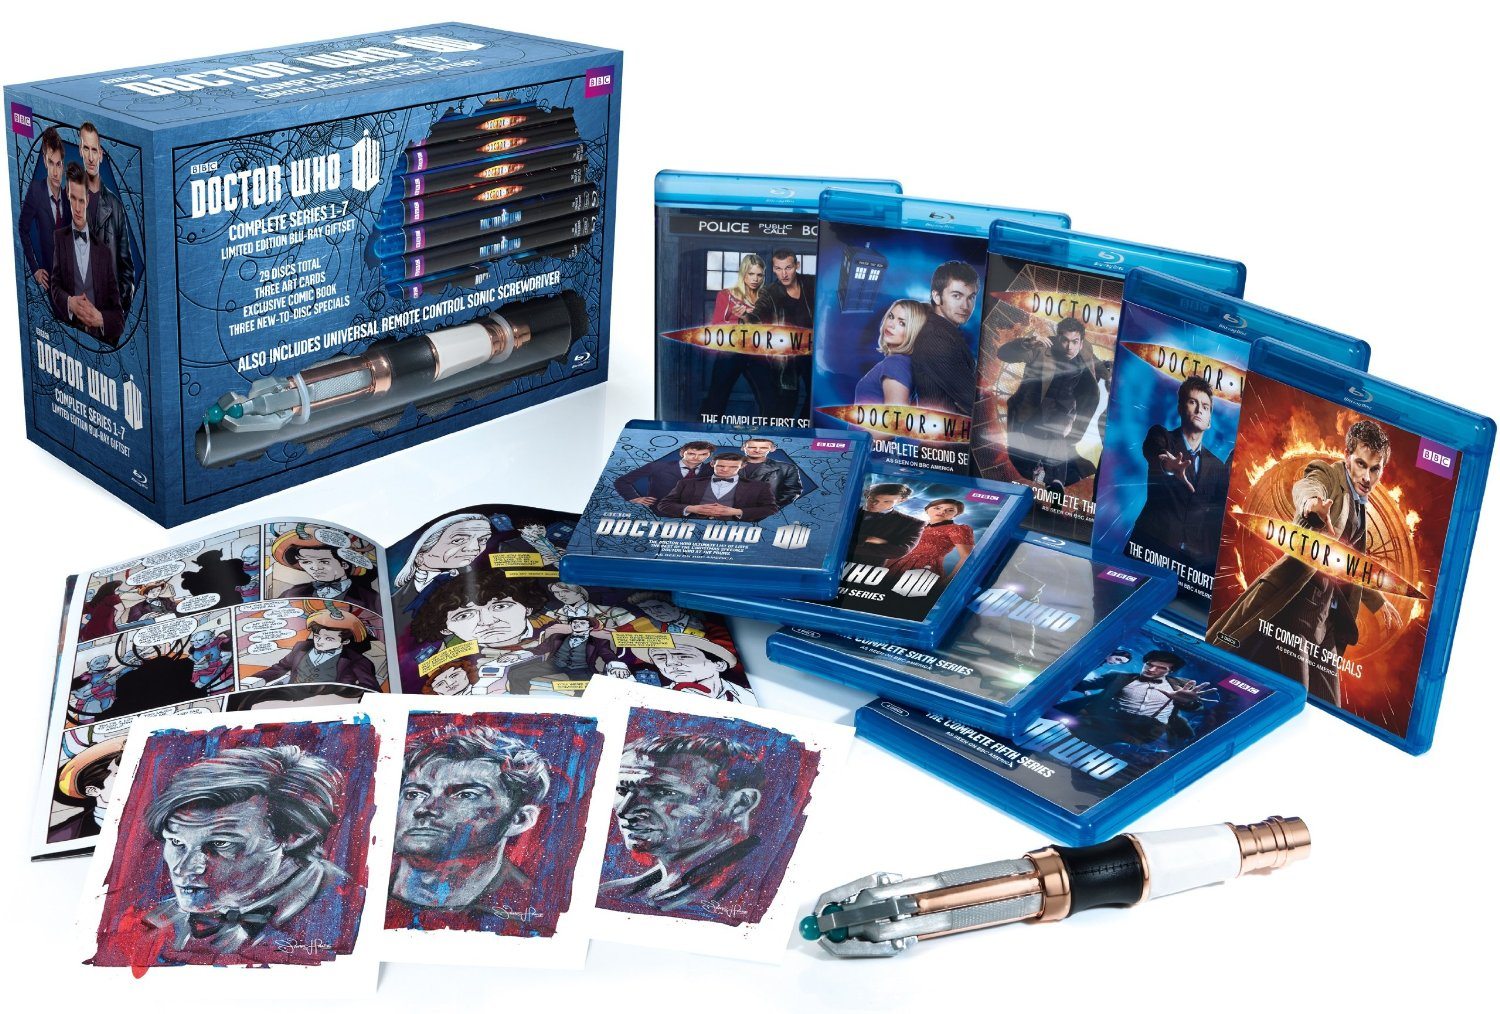 Doctor Who: Series 1-7 Limited Edition Blu-ray Giftset (2013)